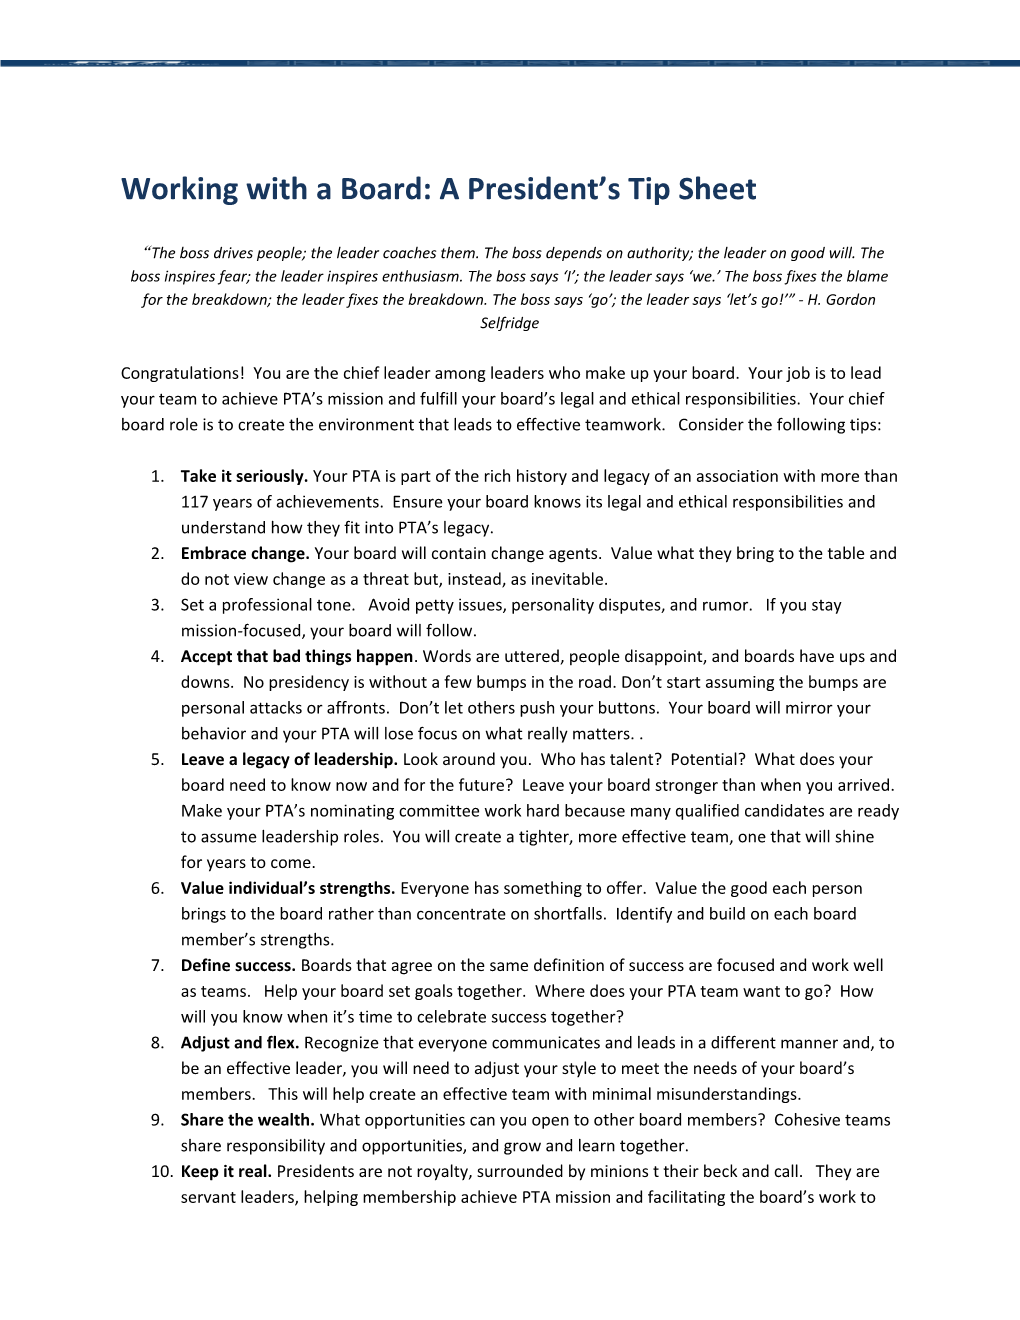 Working with a Board: a President S Tip Sheet